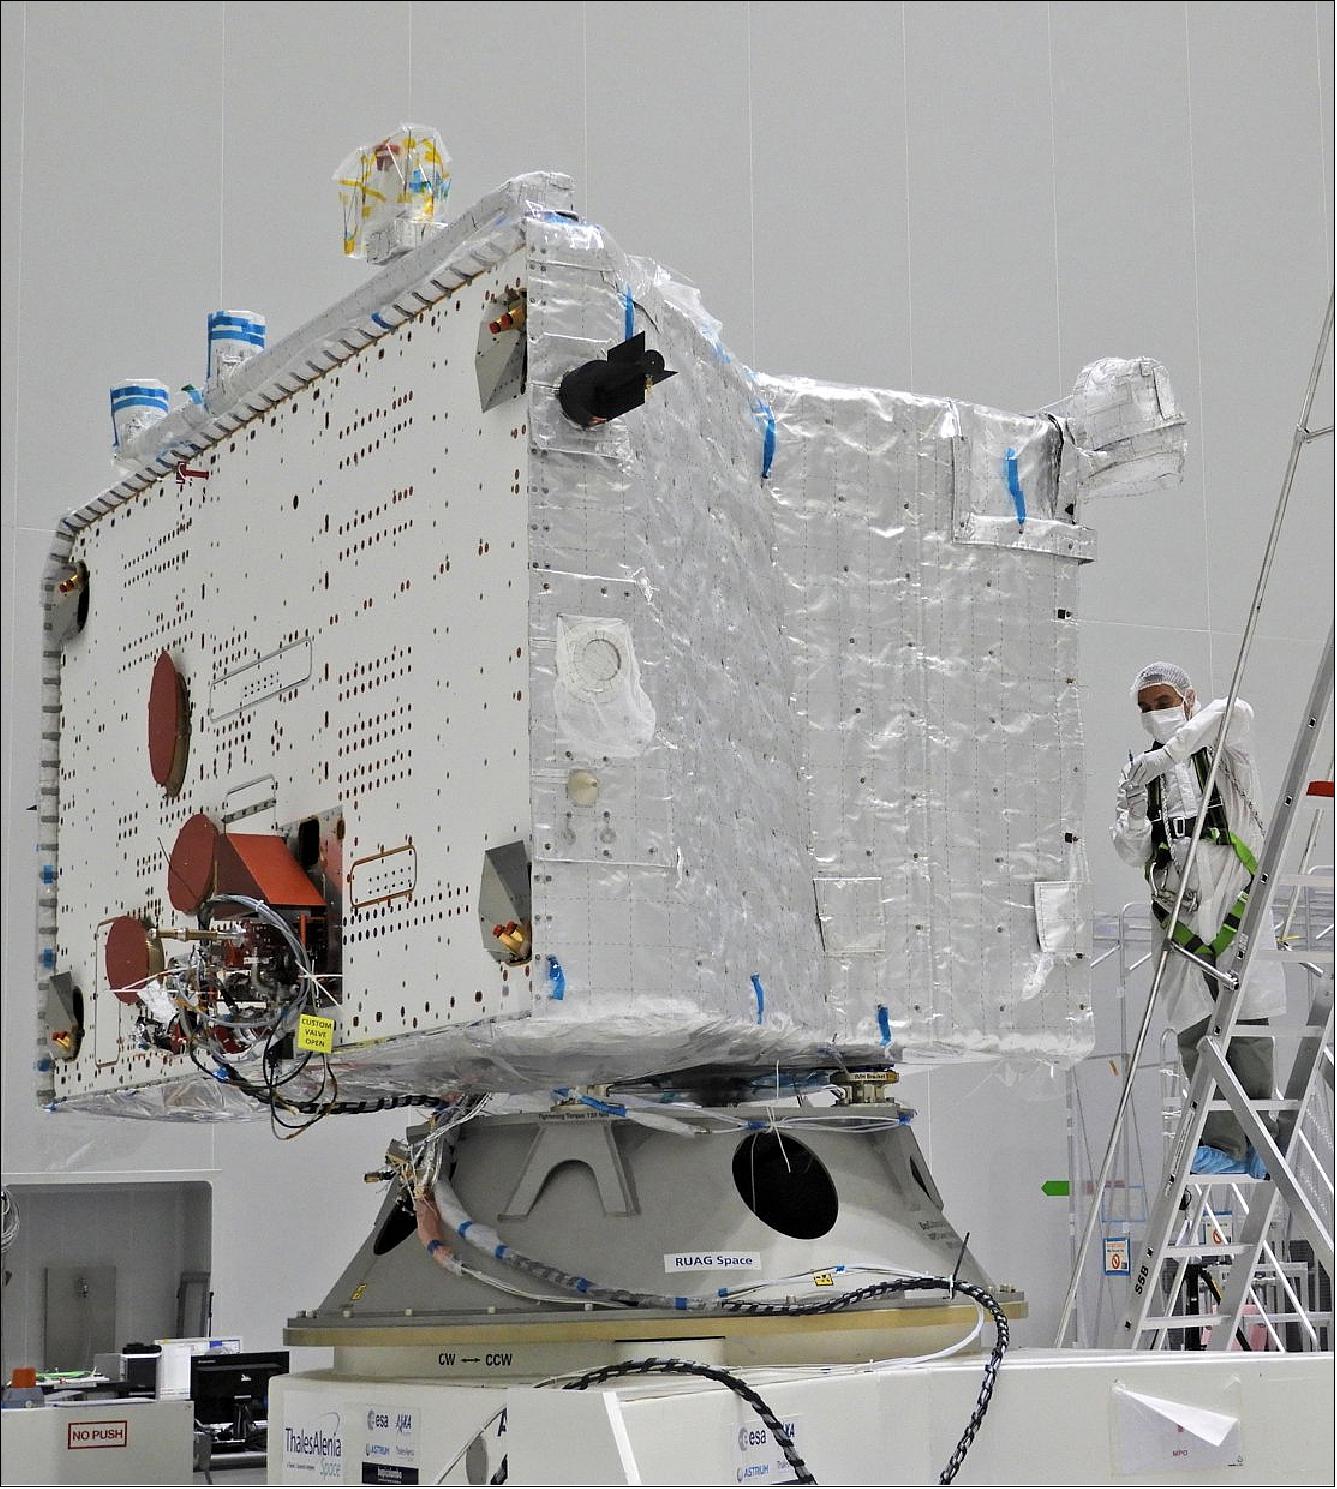 Figure 134: The MPO spacecraft of ESA is shown with the multi-layered insulation (image credit: ESA-B. Guillaume)